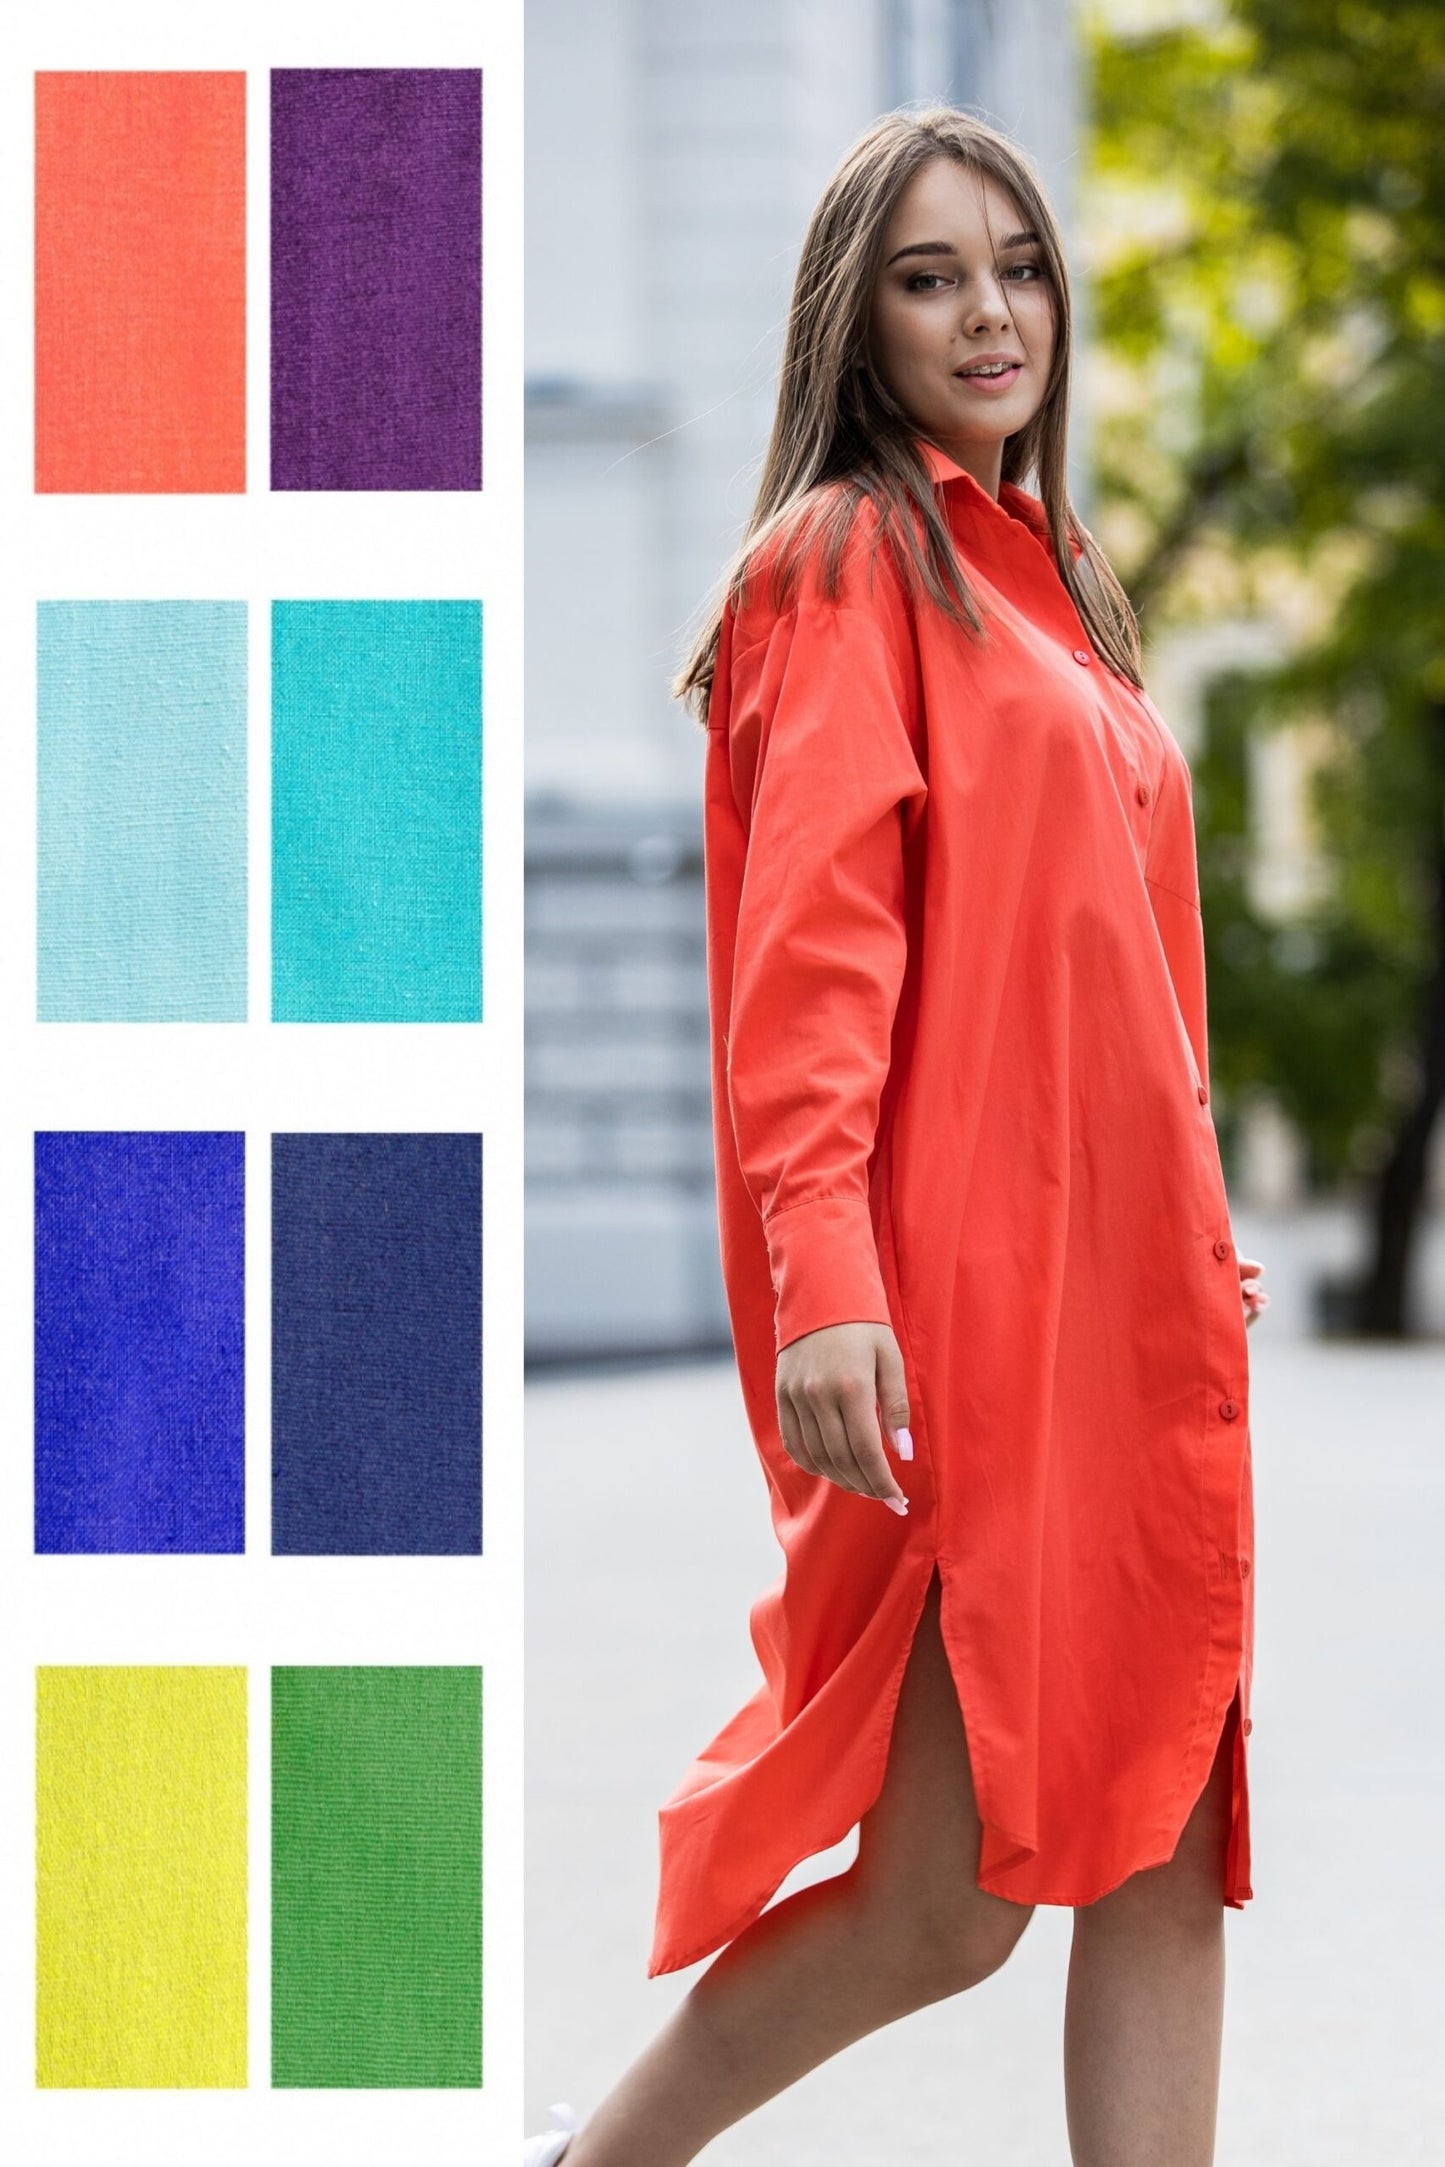 Oversize shirt in many colors